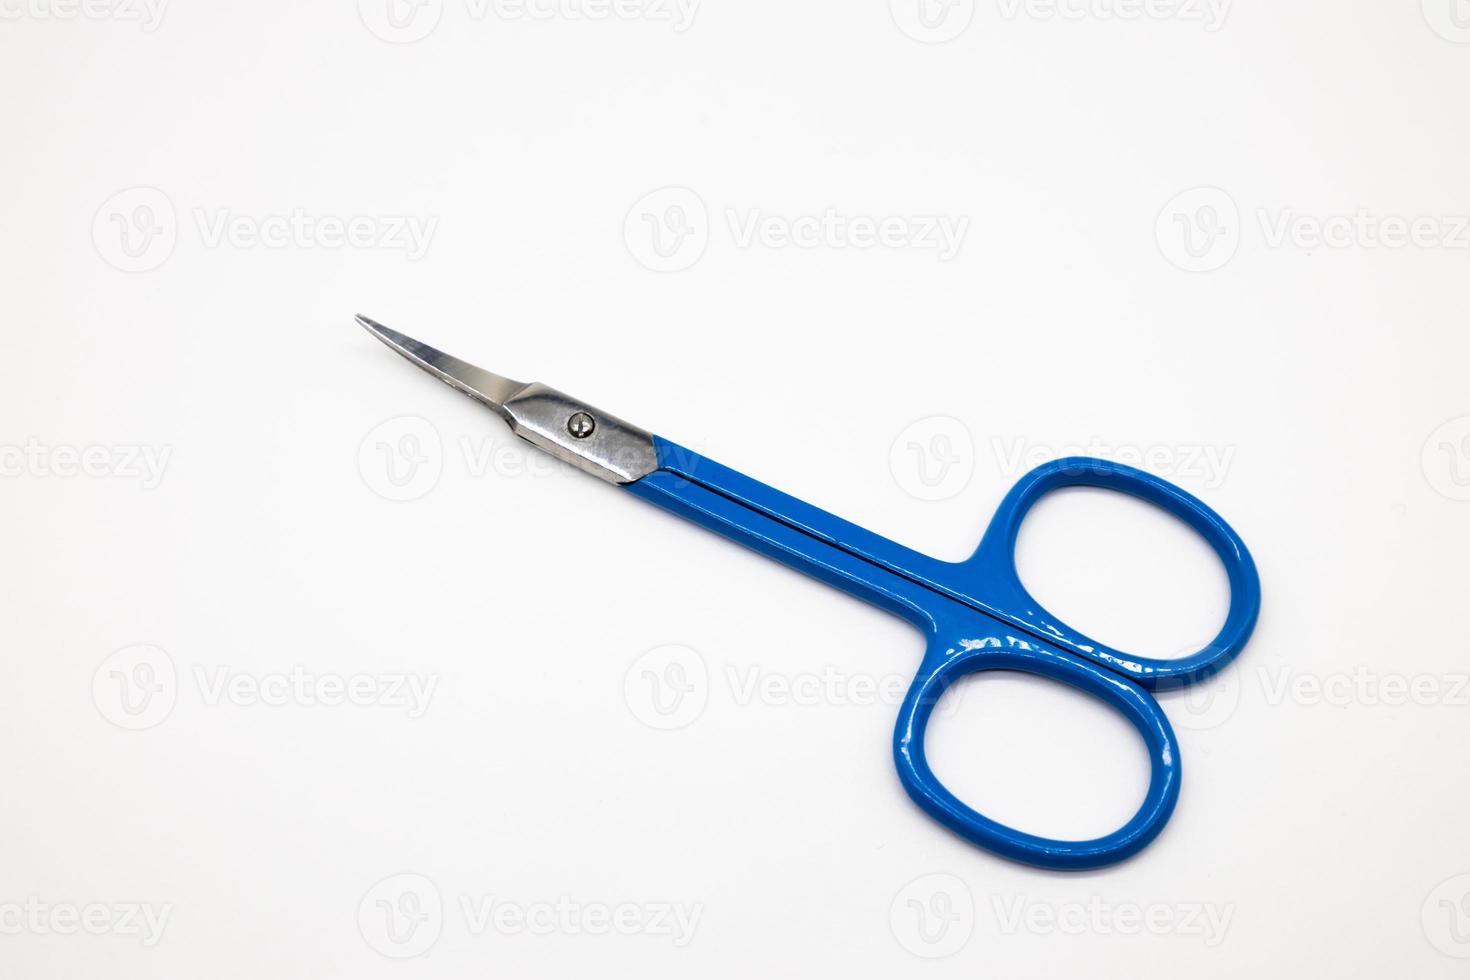 Small scissors for cutting eyebrows and nose hair. Scissors isolated on white background photo